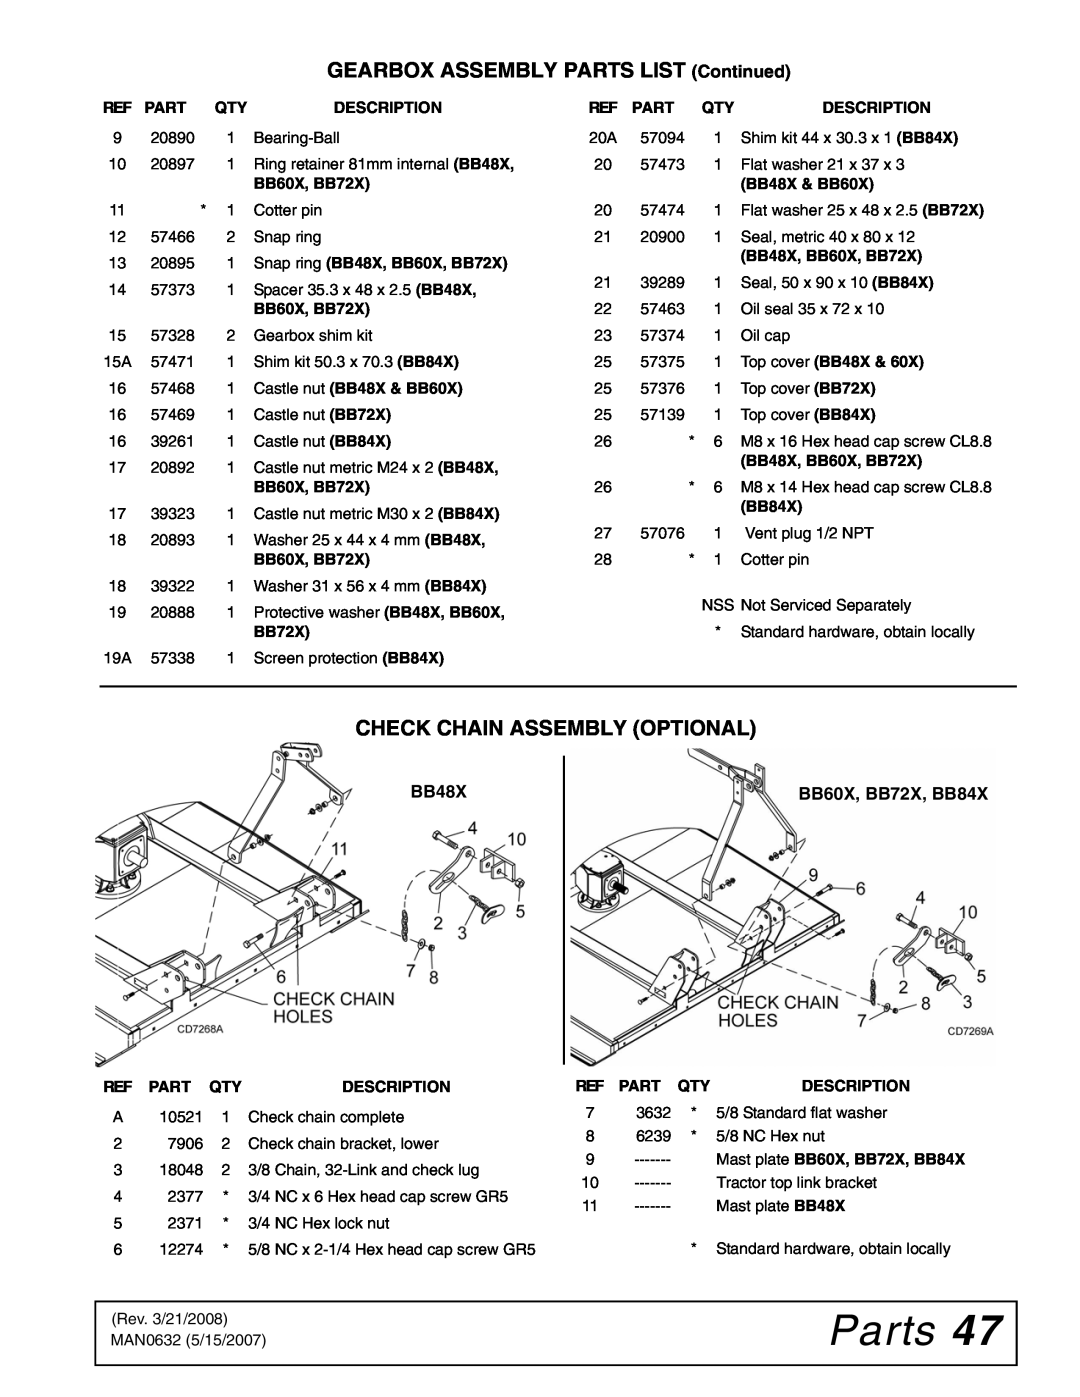 Woods Equipment BB72X, BB84X, BB60X manual Parts, GEARBOX ASSEMBLY PARTS LIST Continued, Check Chain Assembly Optional, BB48X 